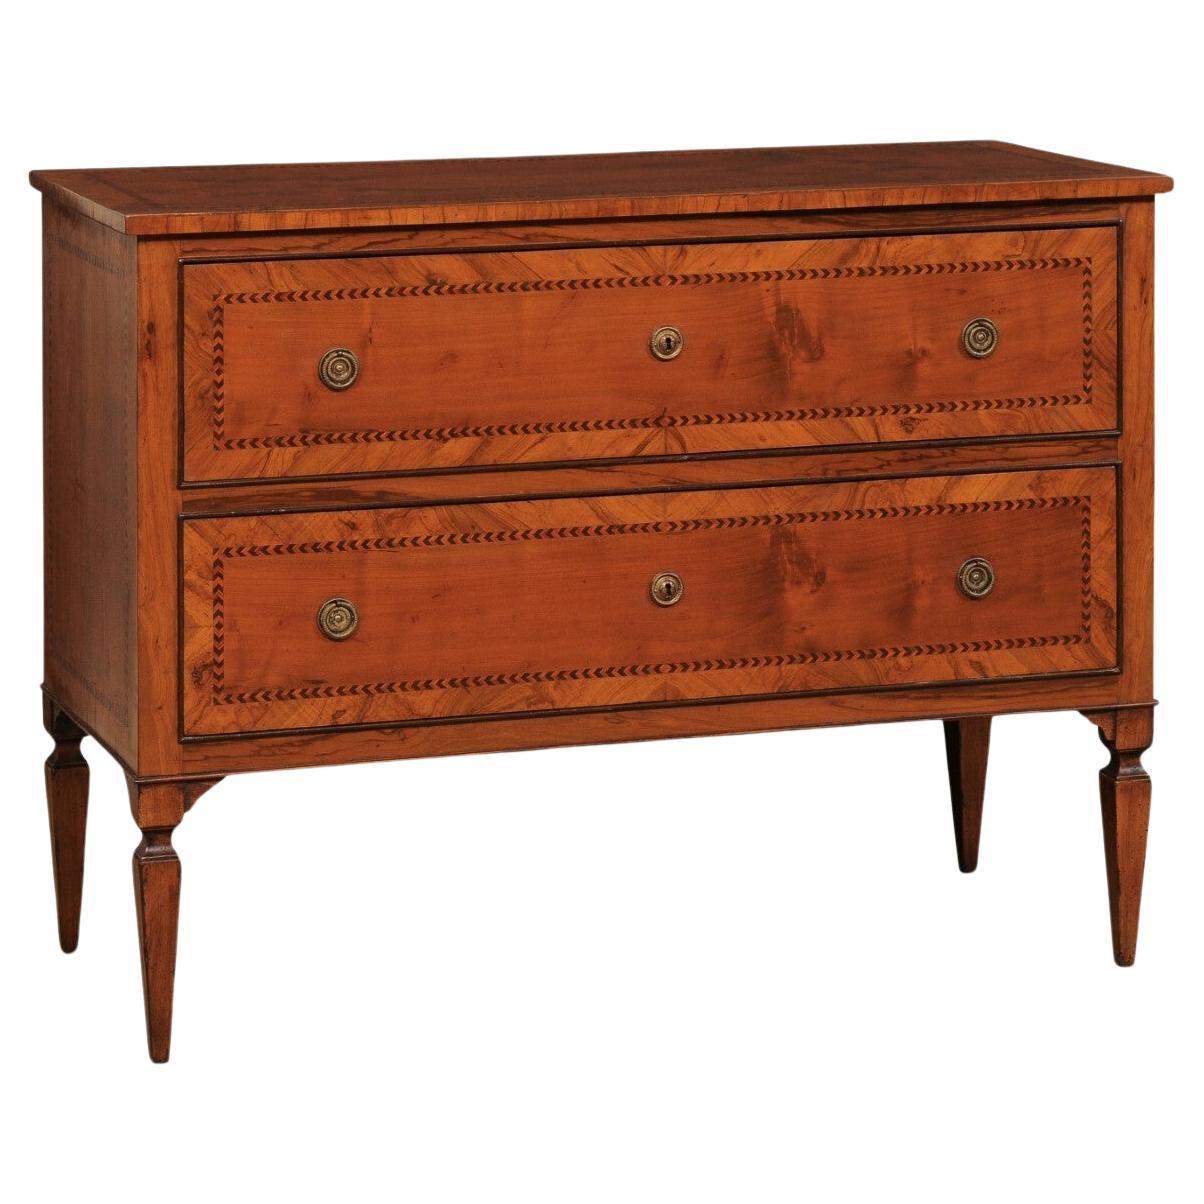 Italian Antique Raised Two-Drawer Chest w/Banding Marquetry Inlay Trim For Sale